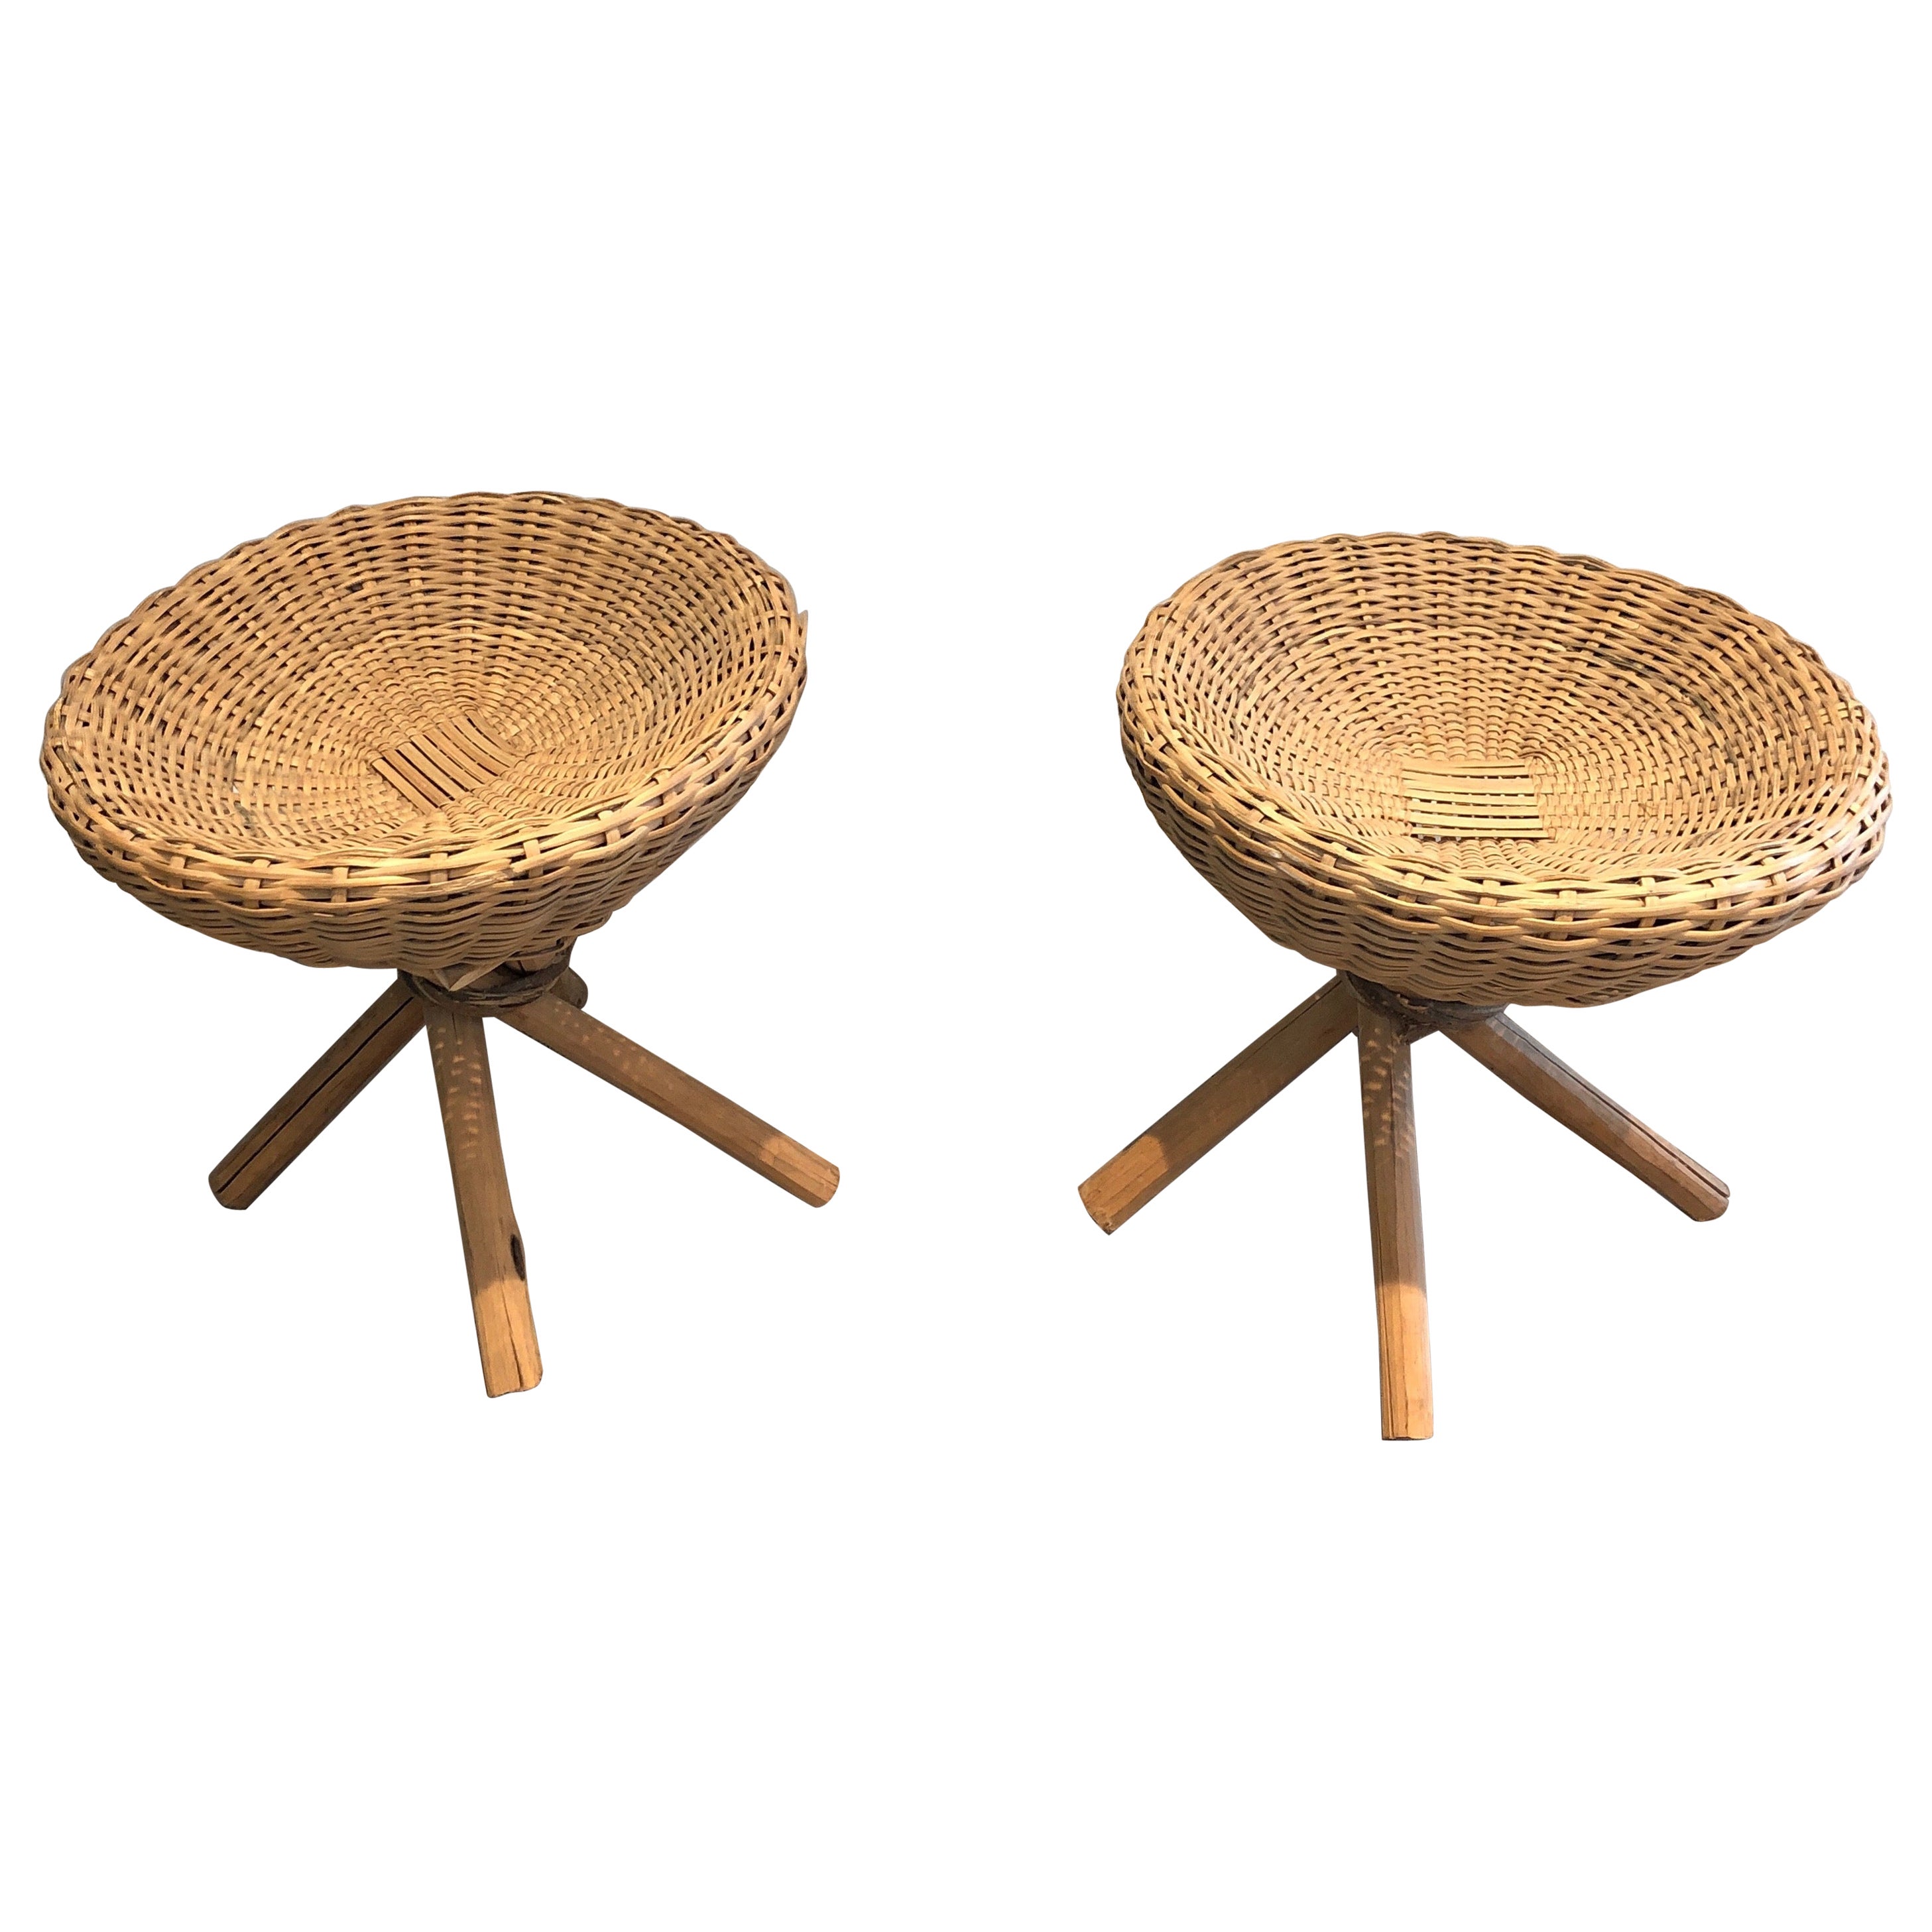 Pair of Wood and Rattan Stools, French, Circa 1970